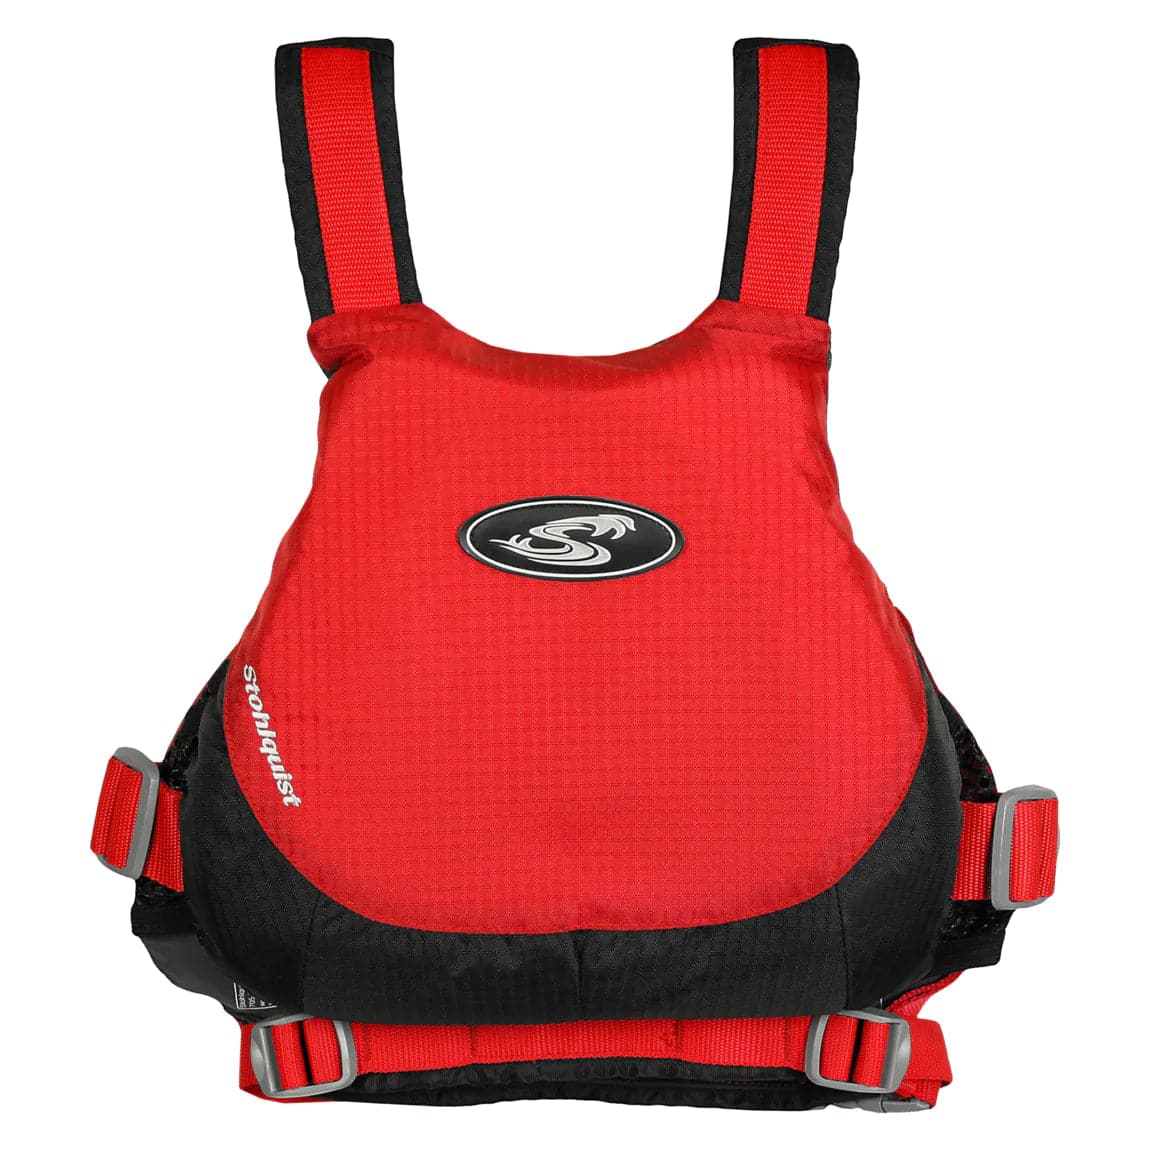 Featuring the Edge PFD men's pfd manufactured by Stohlquist shown here from a sixth angle.